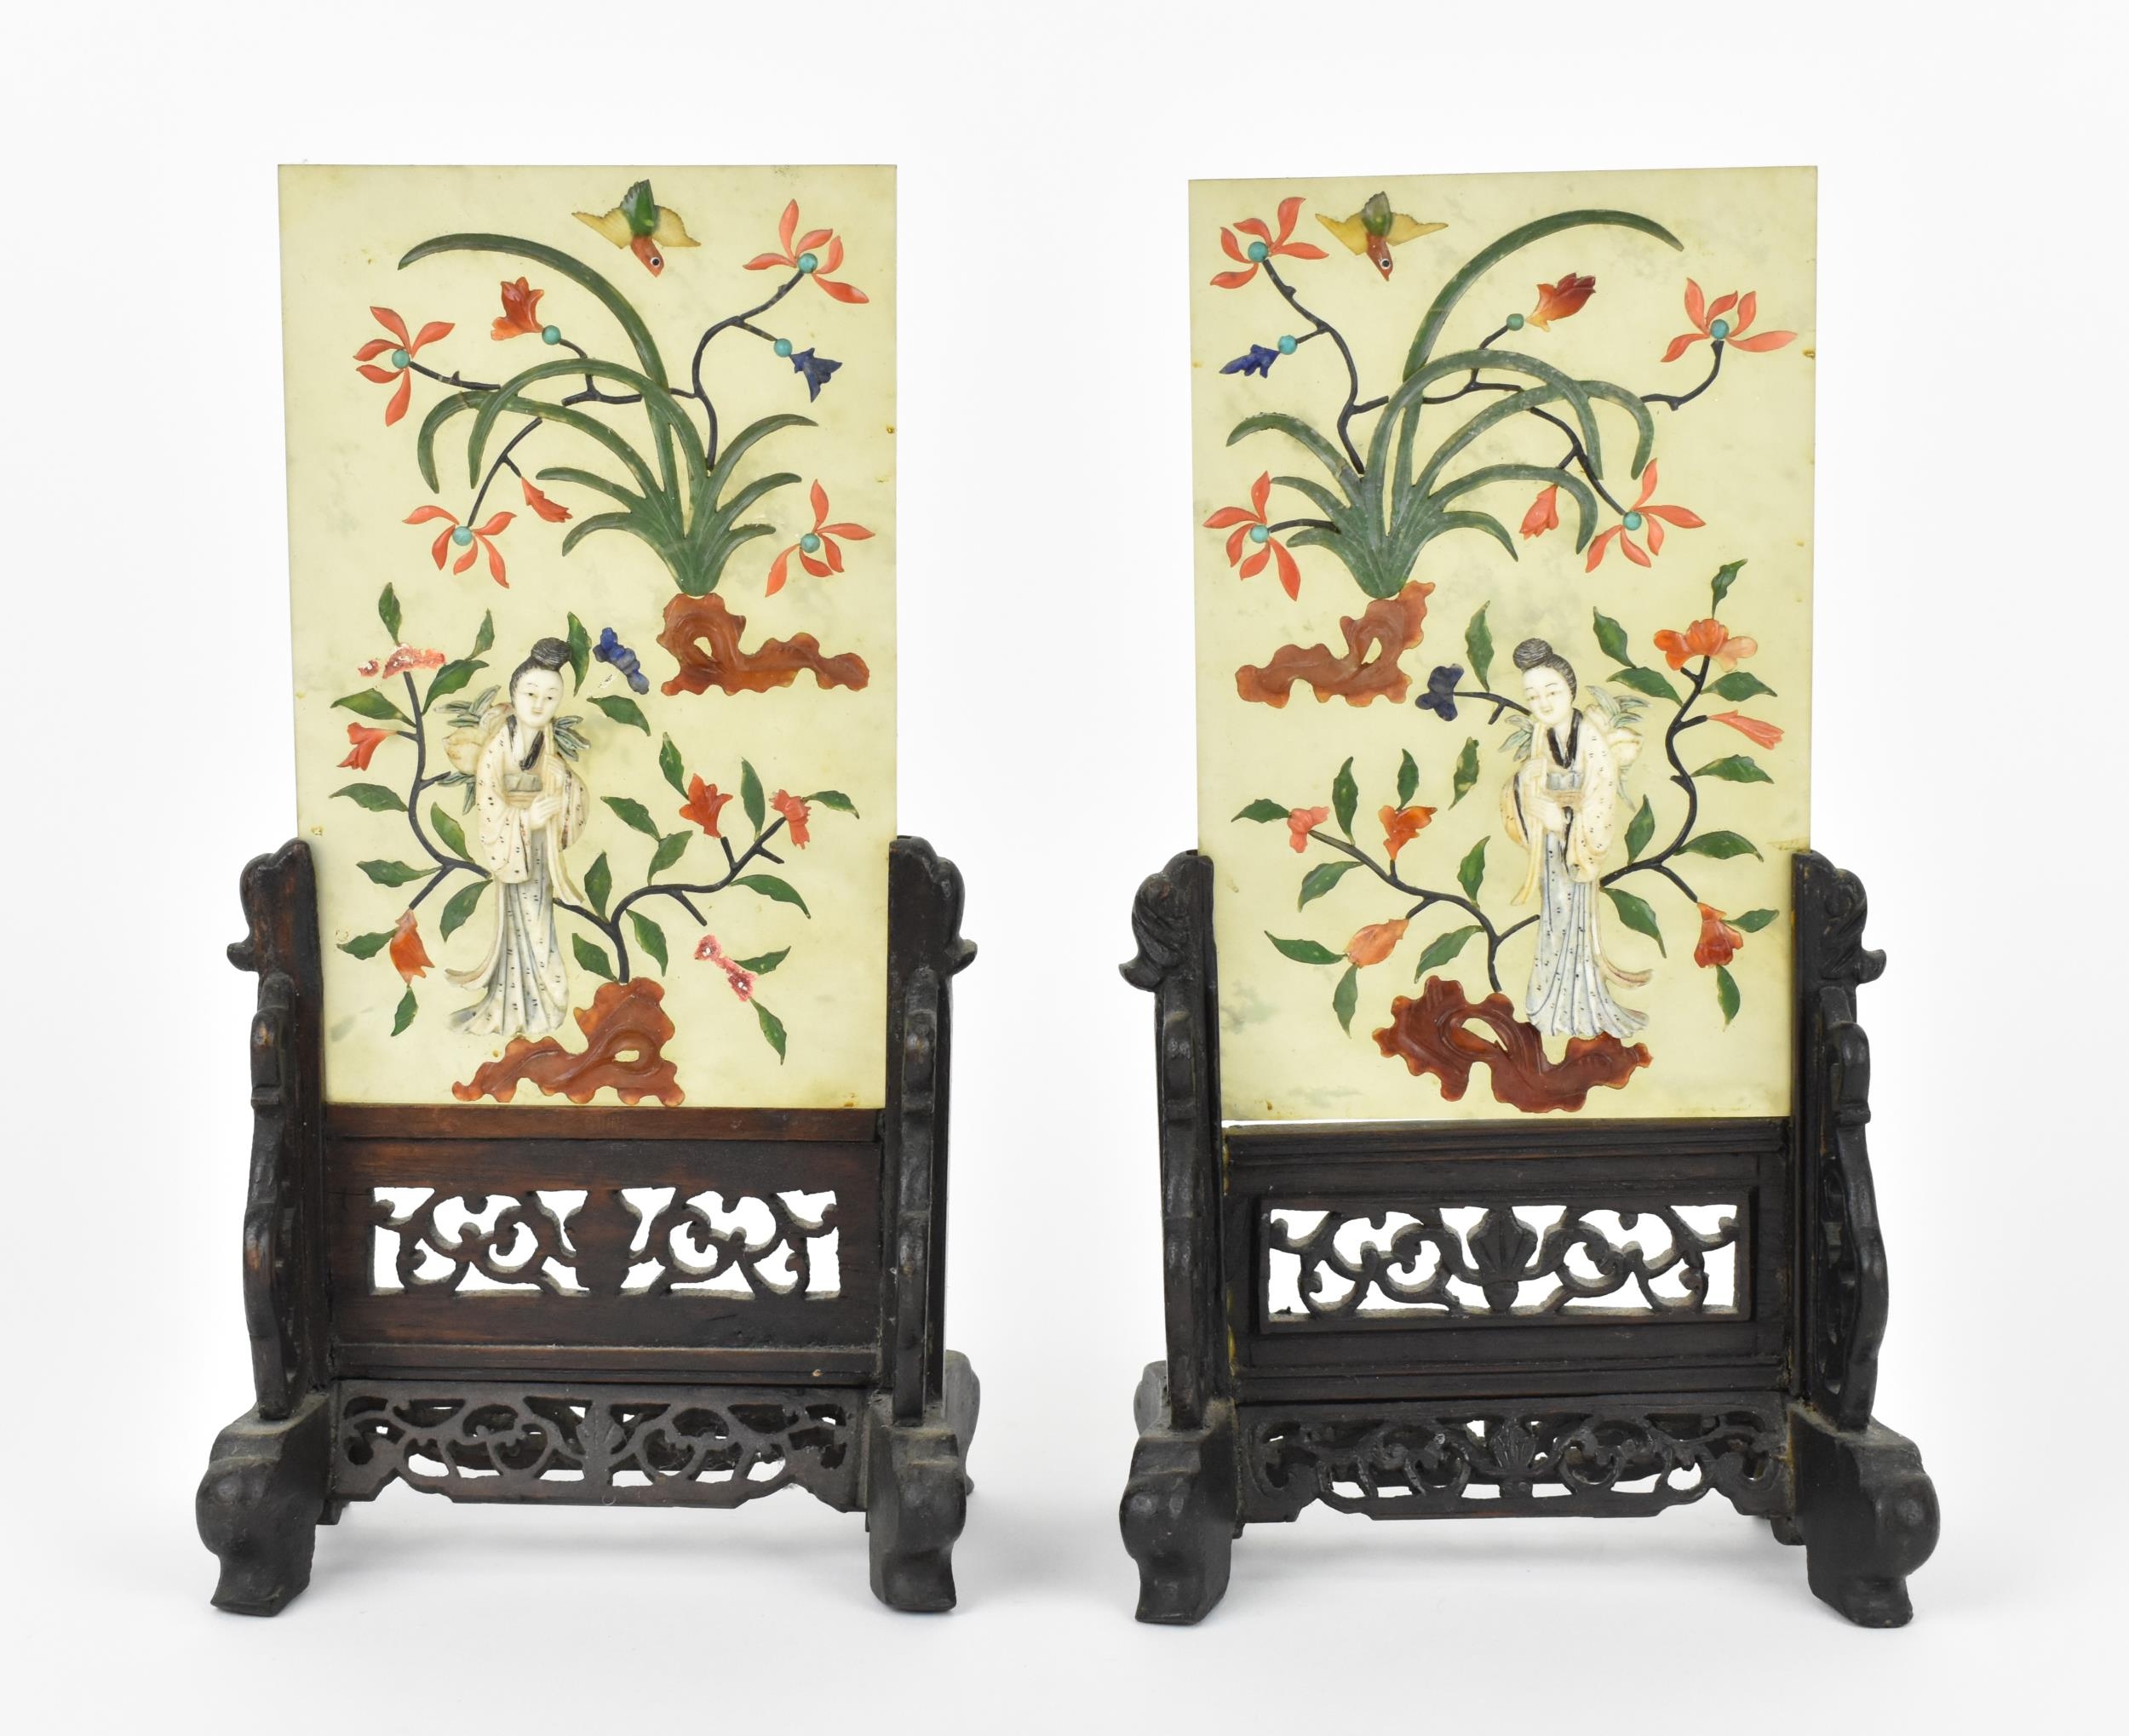 A pair of Chinese jade and hardstone table screens, early 20th century, each with central vertical